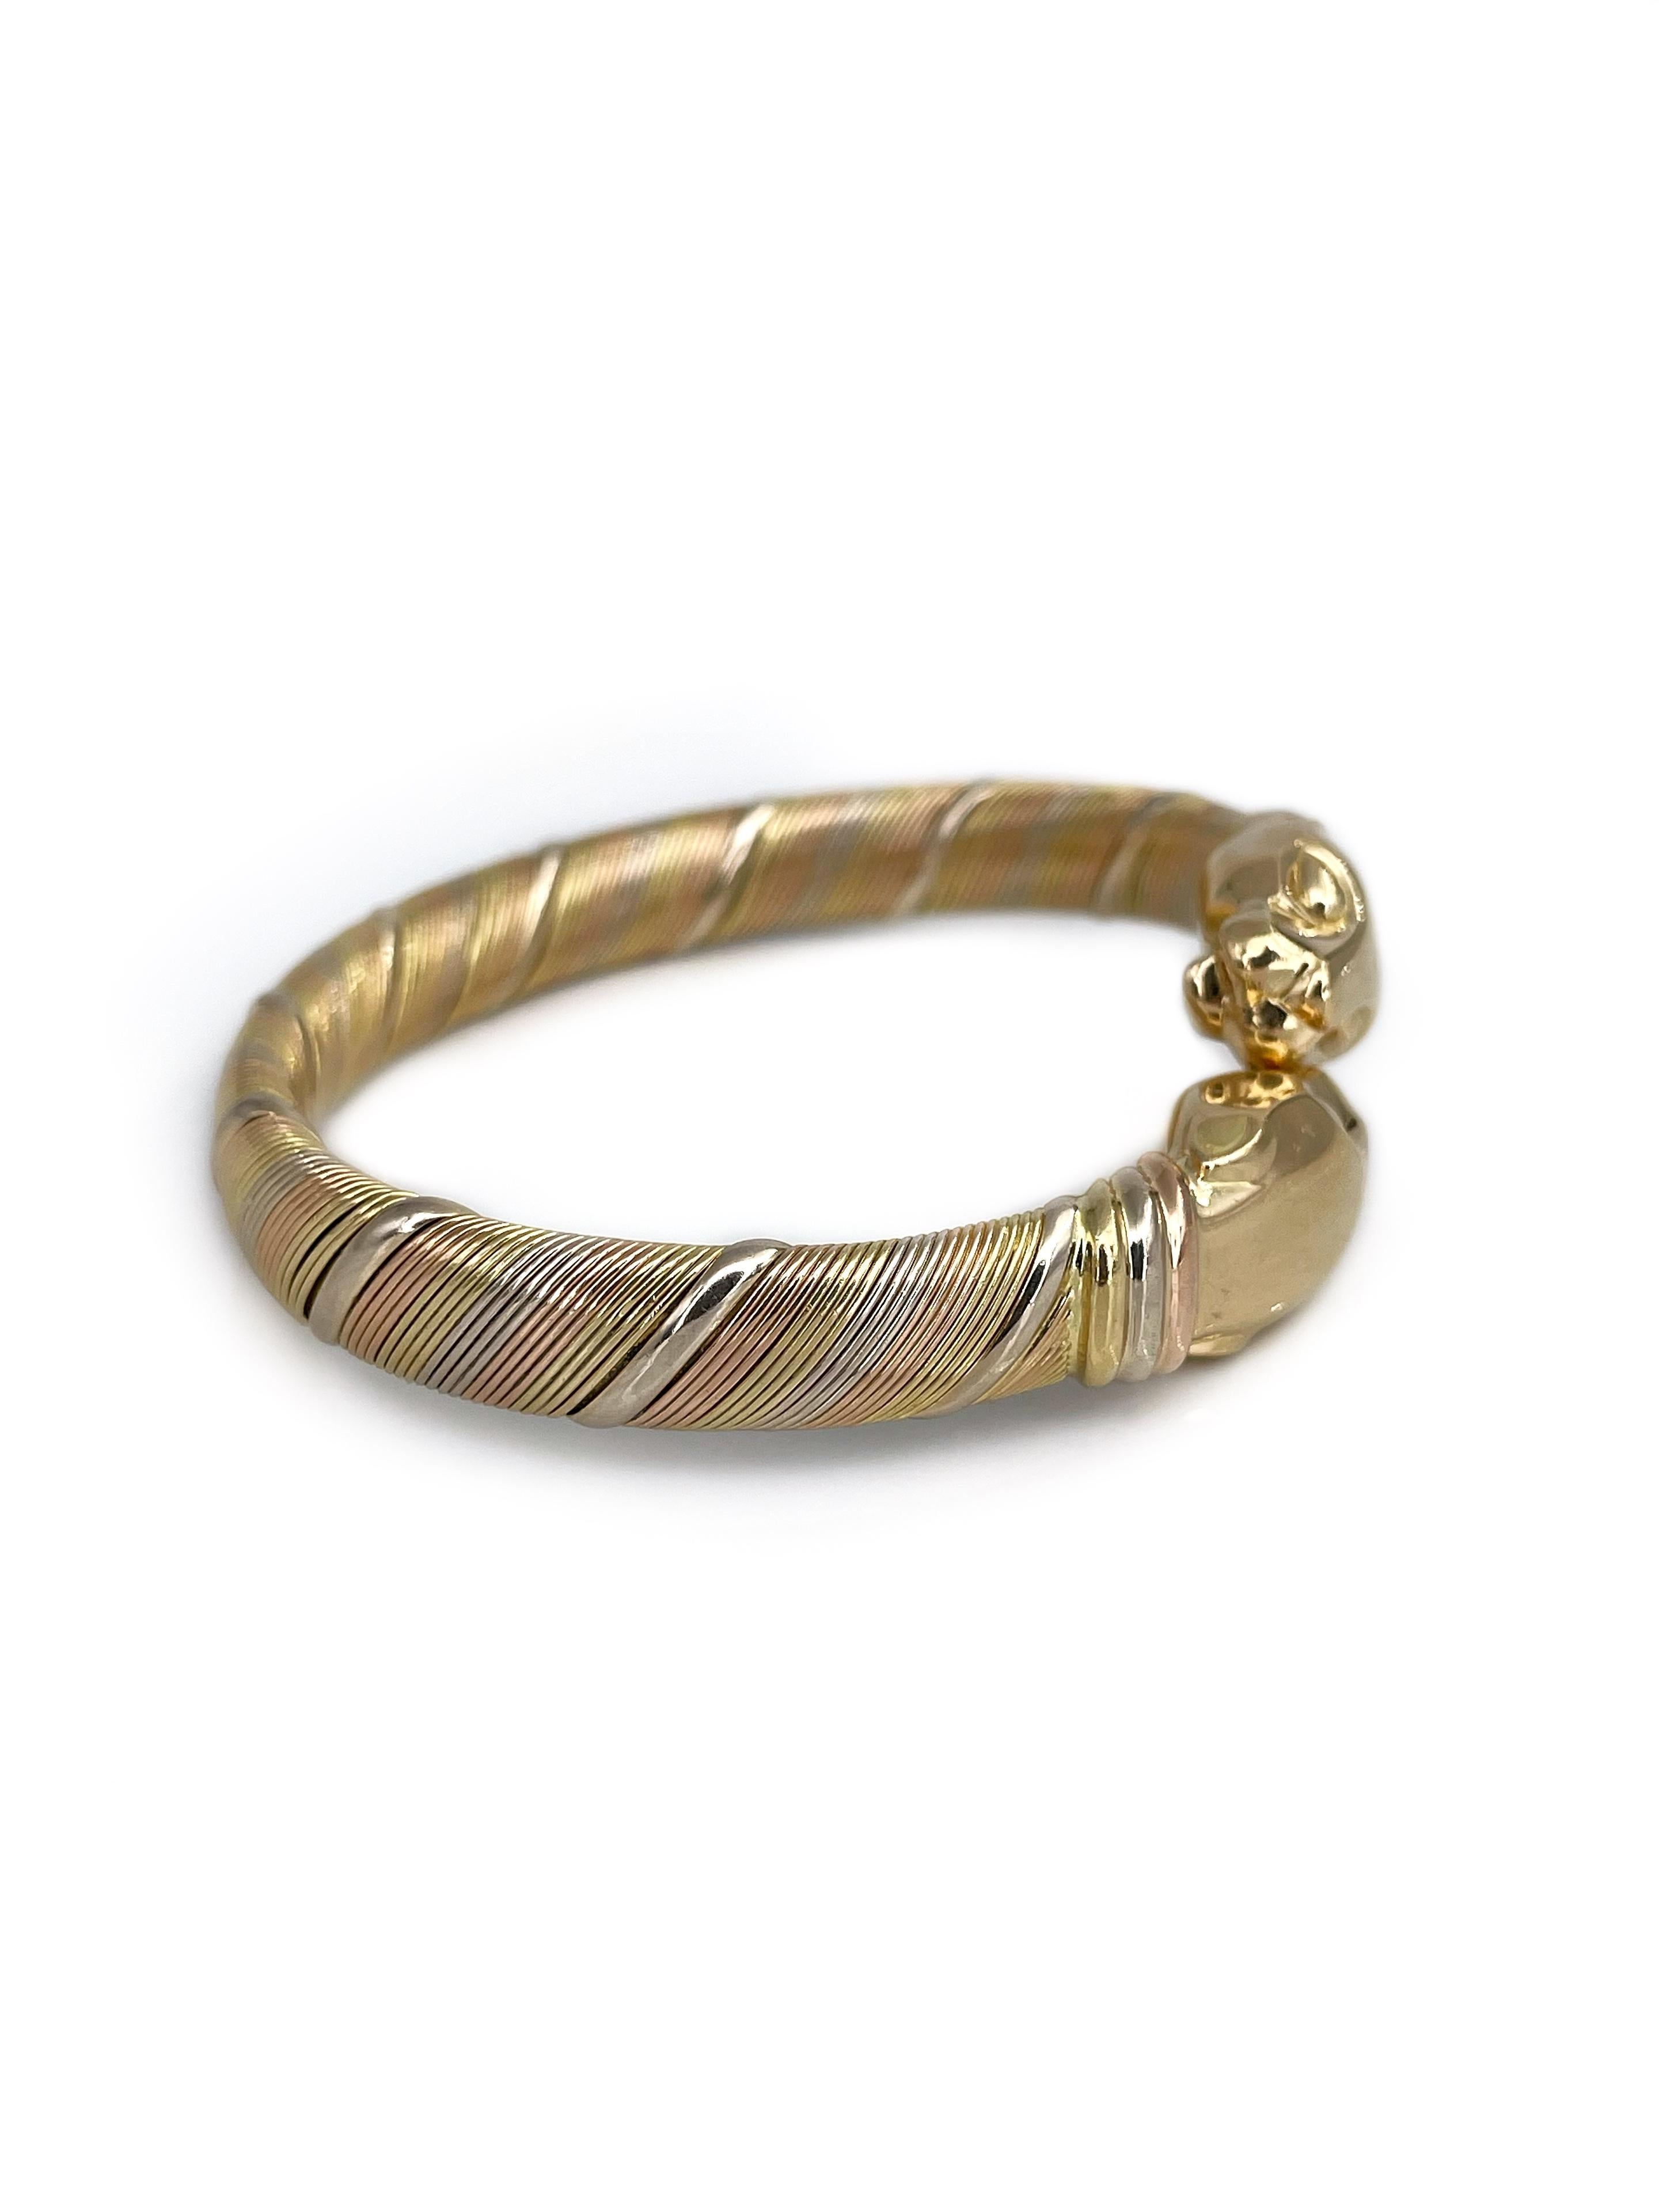 This is a stylish vintage double headed panther cuff bangle bracelet designed by Cartier in 1980s. It is crafted in 18K tri-color (rose, white and yellow) gold. The piece is half flexible which makes it quite easy to put on and off the wrist.